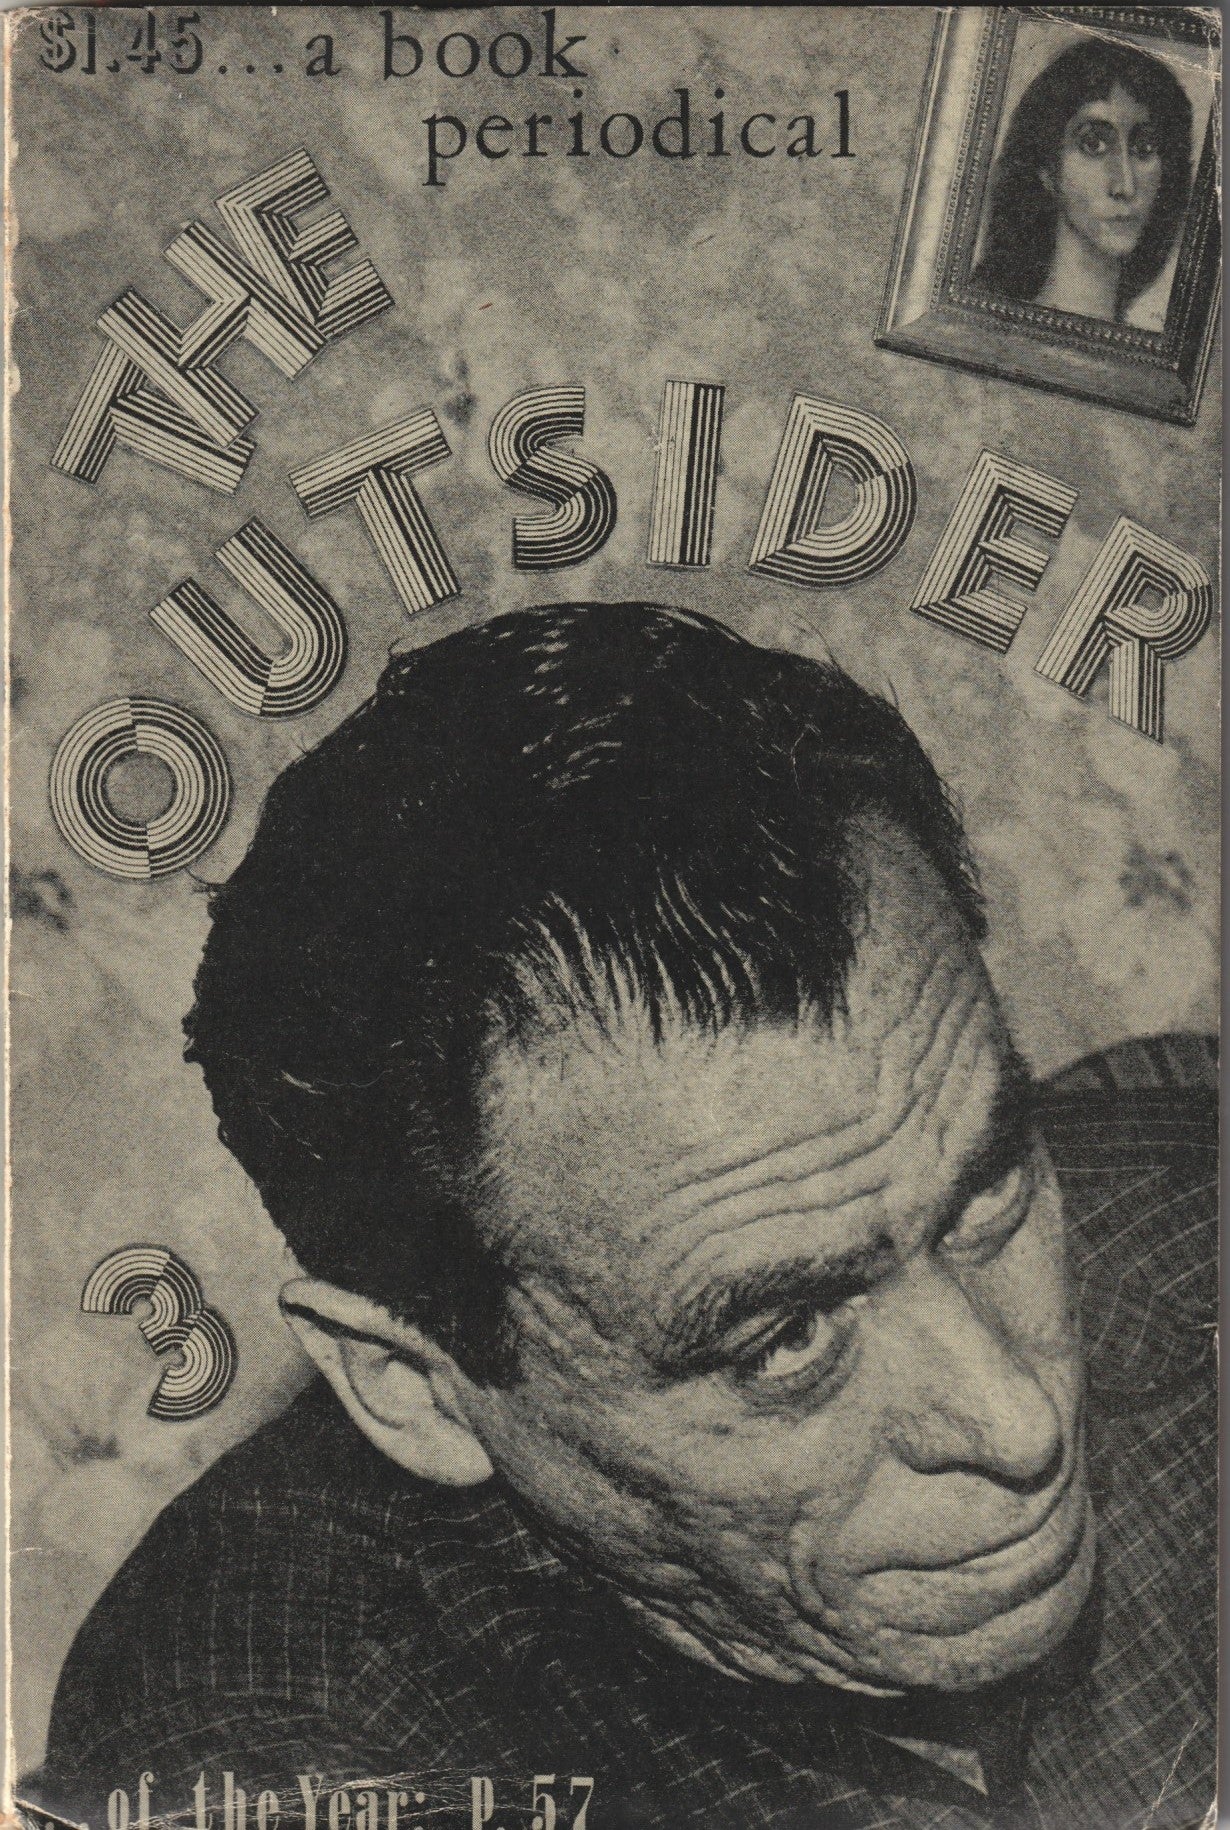 Charles Bukowski, Outsider of the Year Special Section (1963)